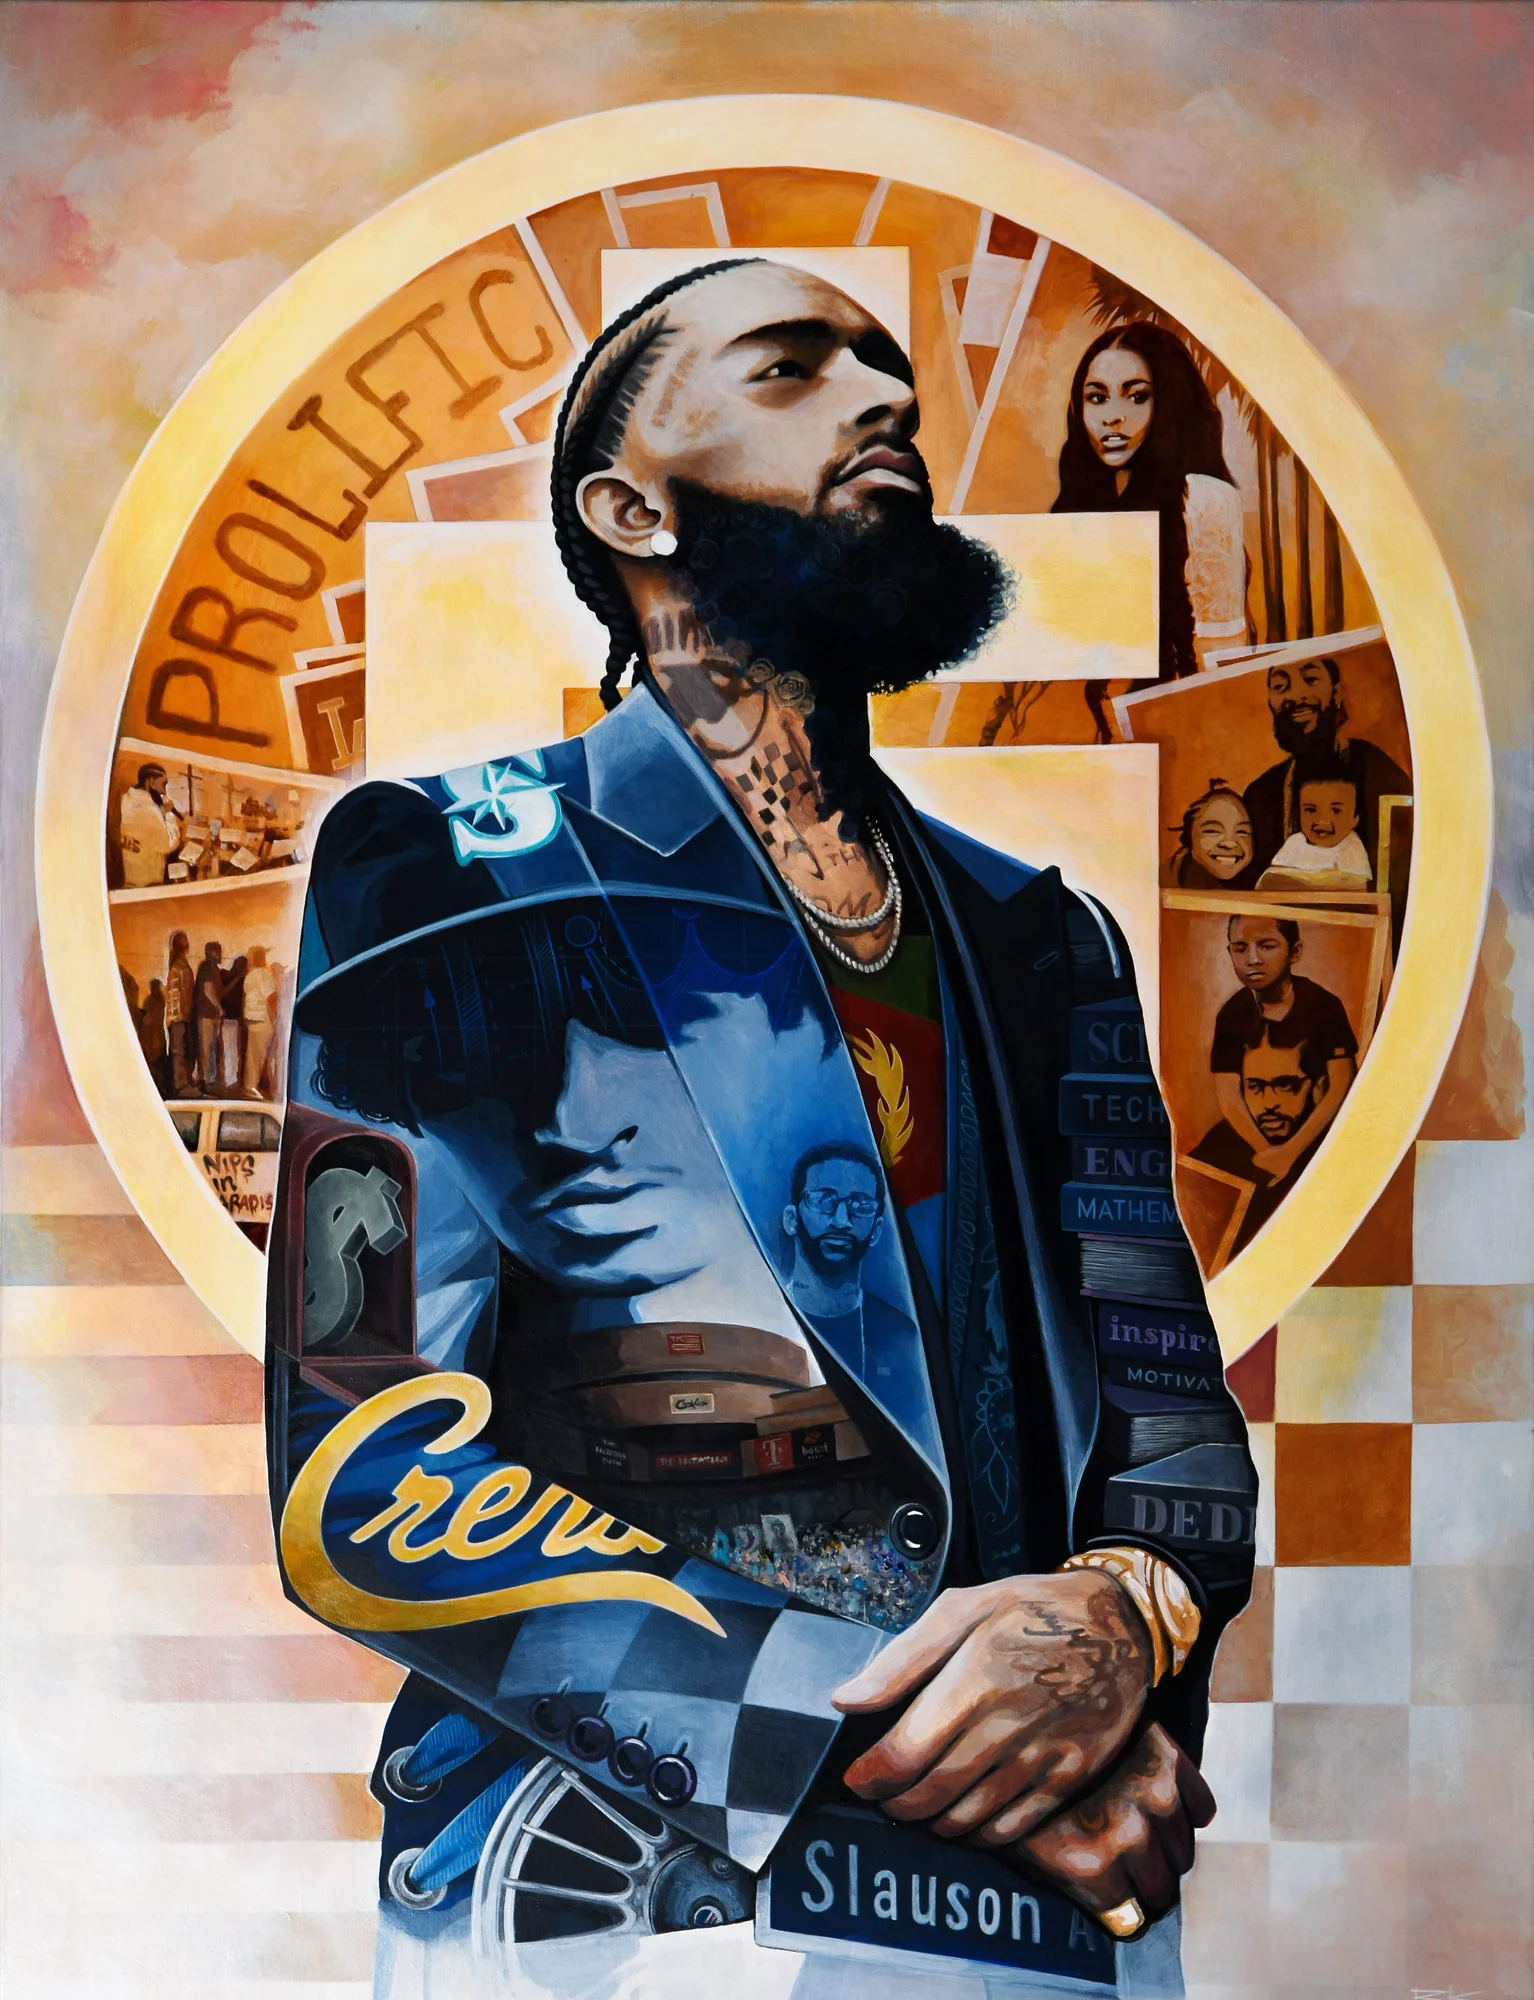 A painted portrait of a bearded man looking upwards. Within his blue blazer jacket are abstract patterns containing other faces and objects. Behind him is a large, yellow halo which also incorporates additional faces. In the top left of the halo the word “PROLIFIC” is written in all caps.